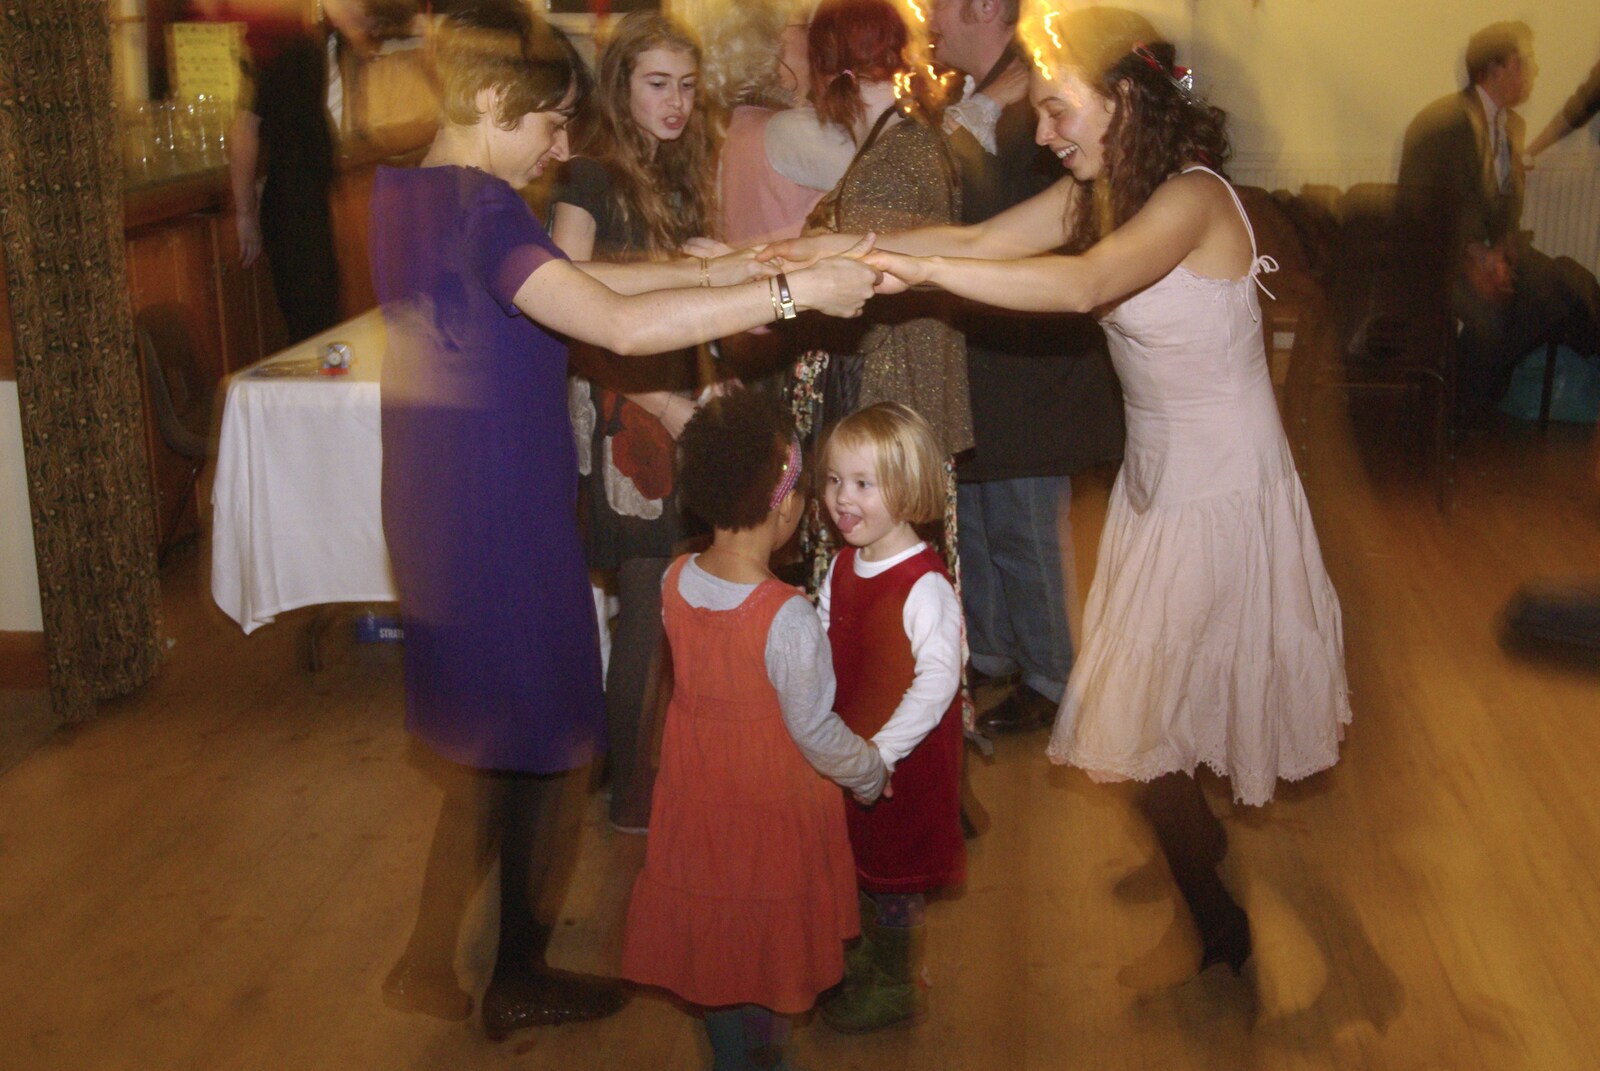 Some tiny girls dance from An Oxford Wedding, Iffley, Oxfordshire - 20th December 2008